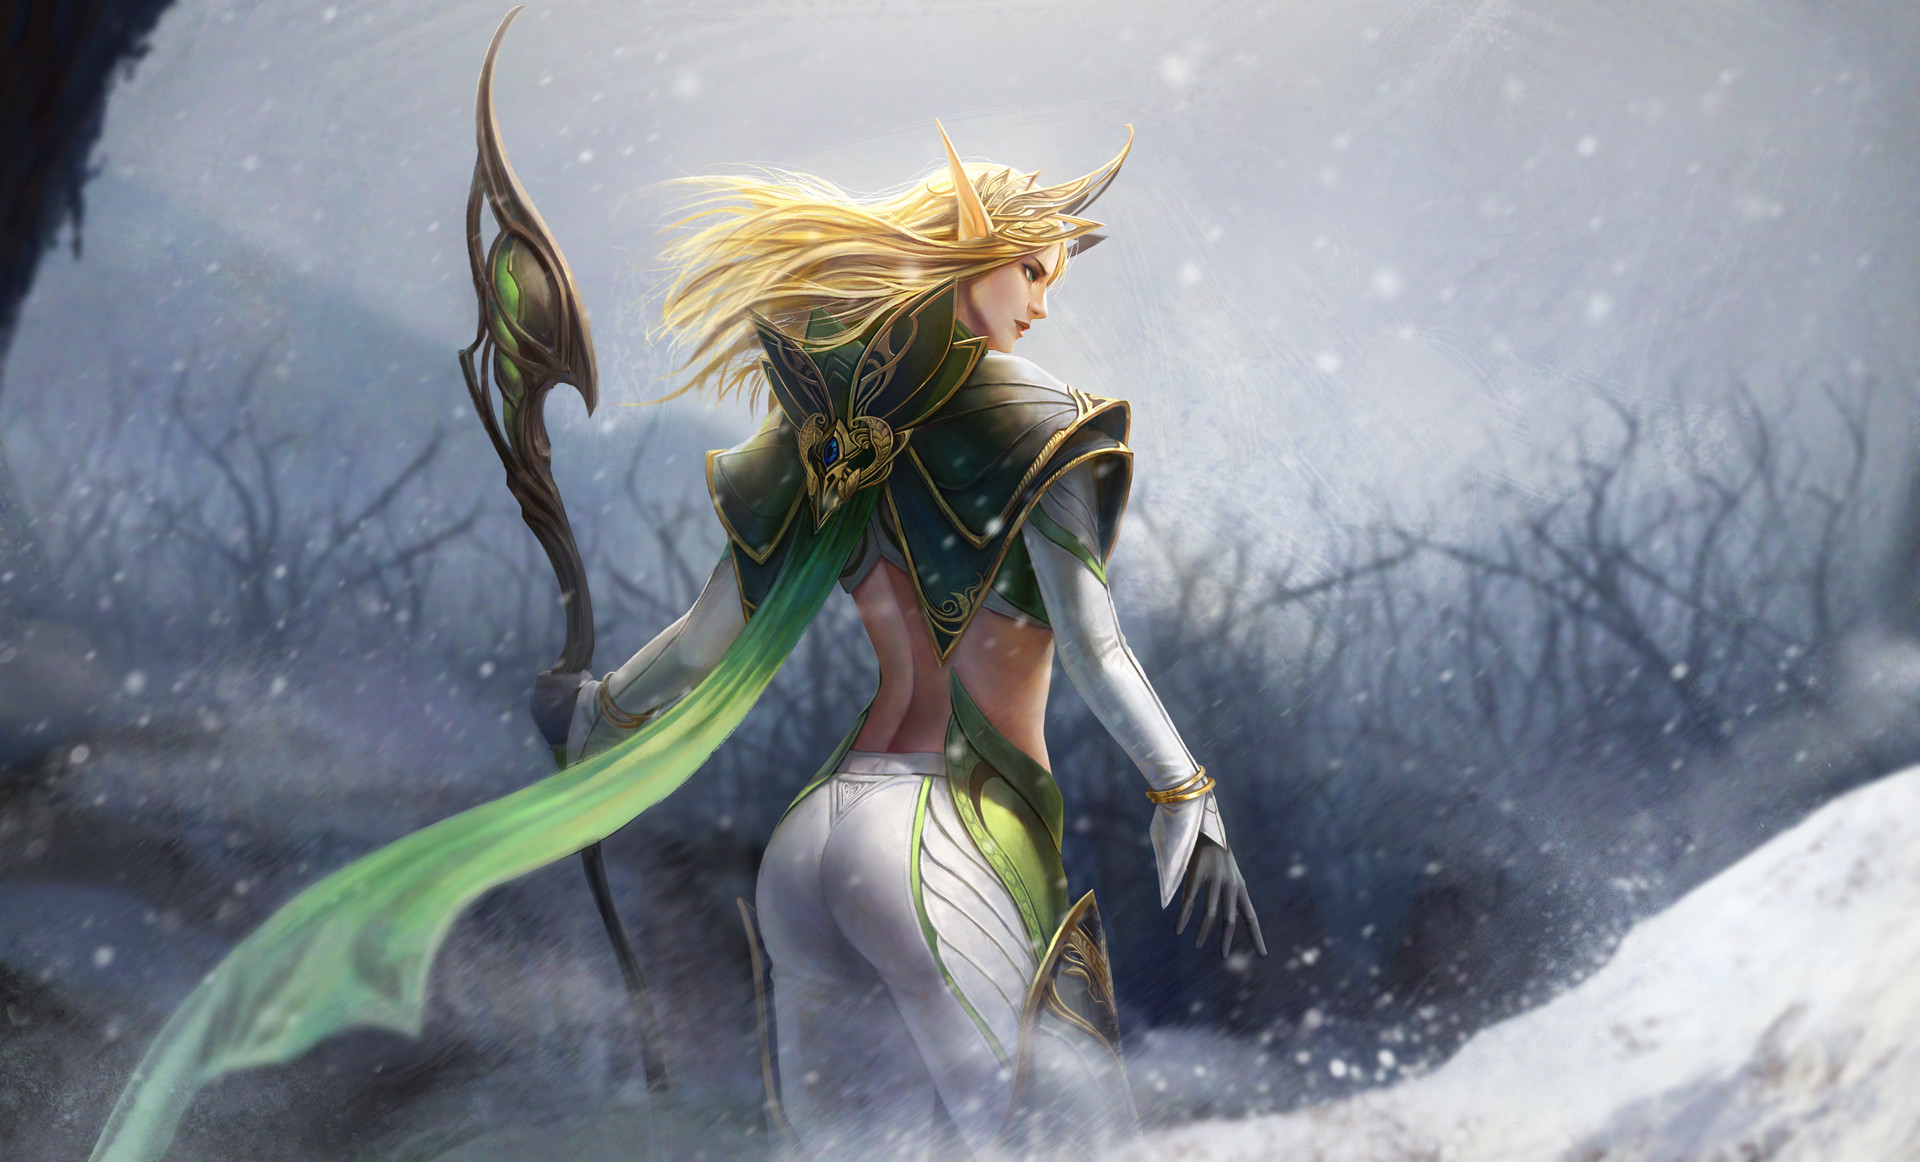 General 1920x1162 TaeKwon Kim drawing women elves blonde long hair wind helmet pointy ears cape armor magician green clothing white clothing staff snow snowing